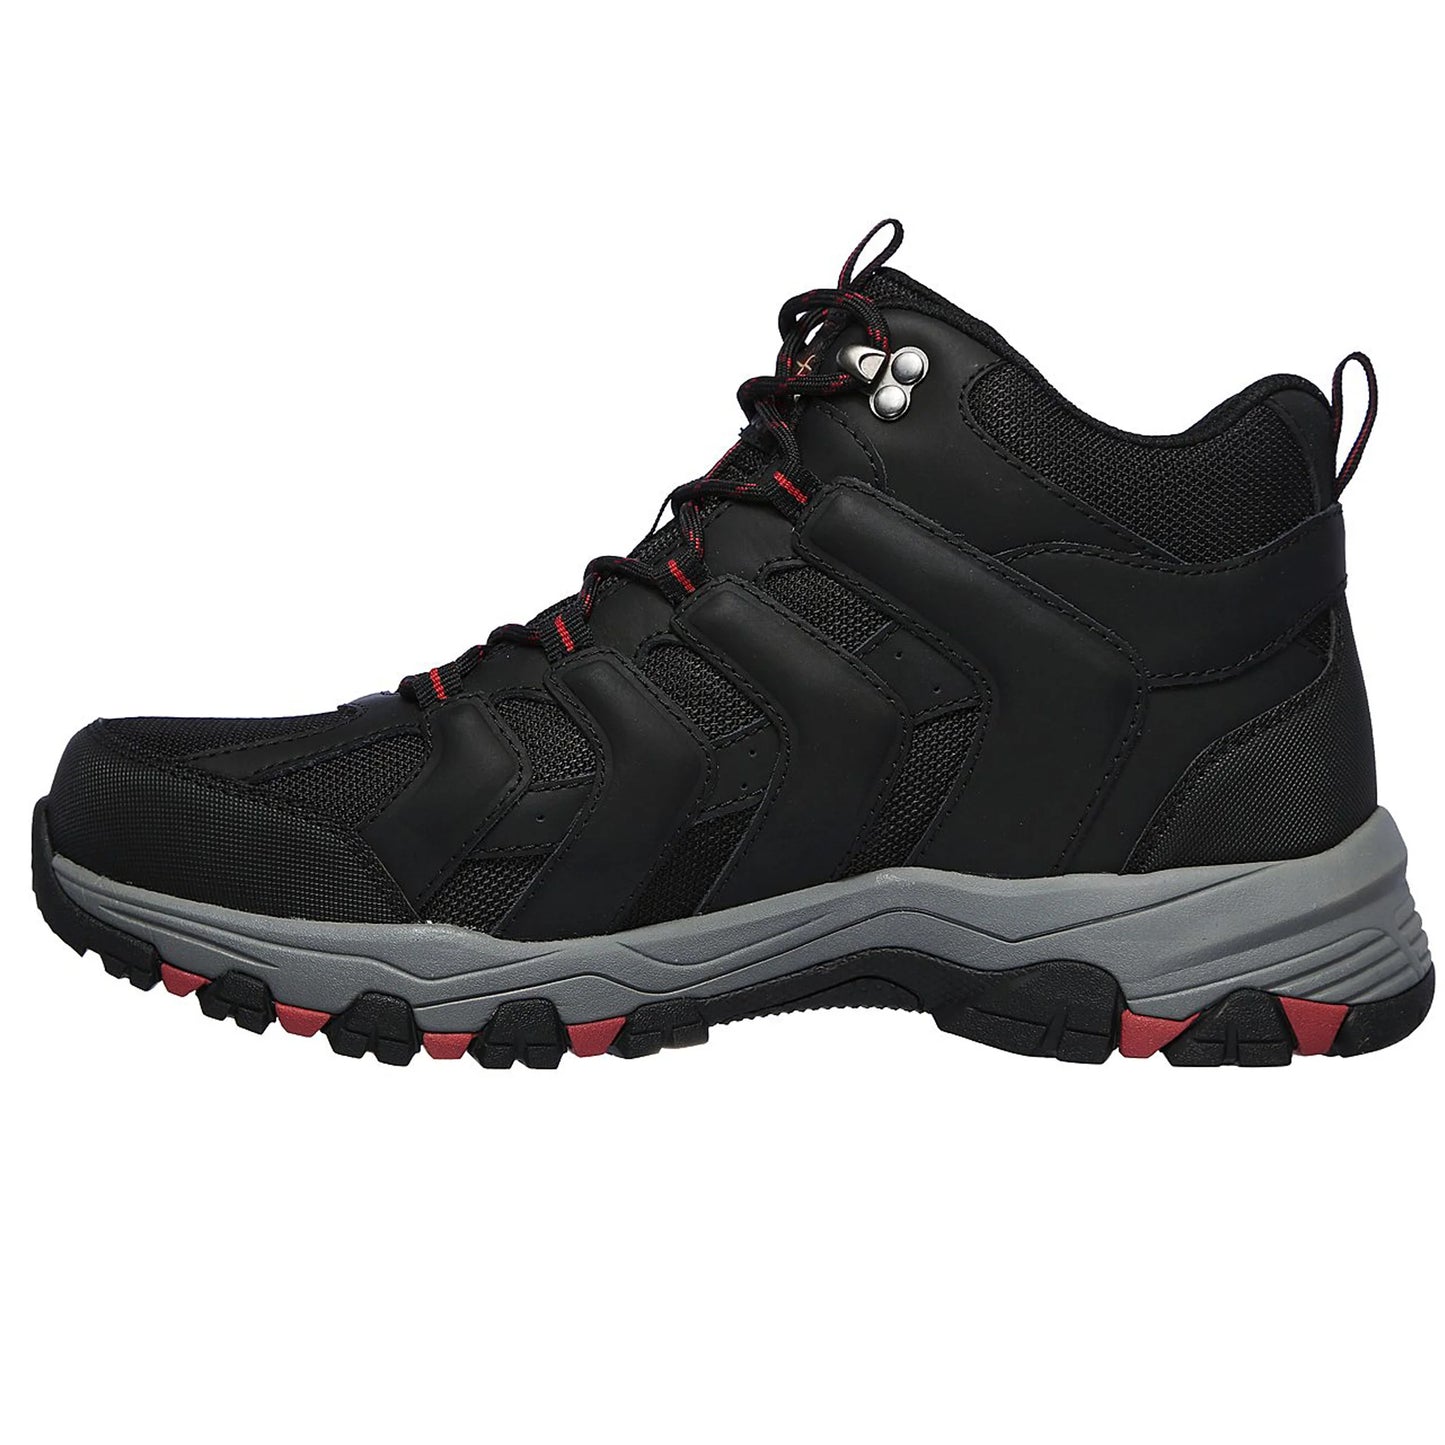 Skechers Relaxed Fit®: Selmen - Relodge boot. Hombre